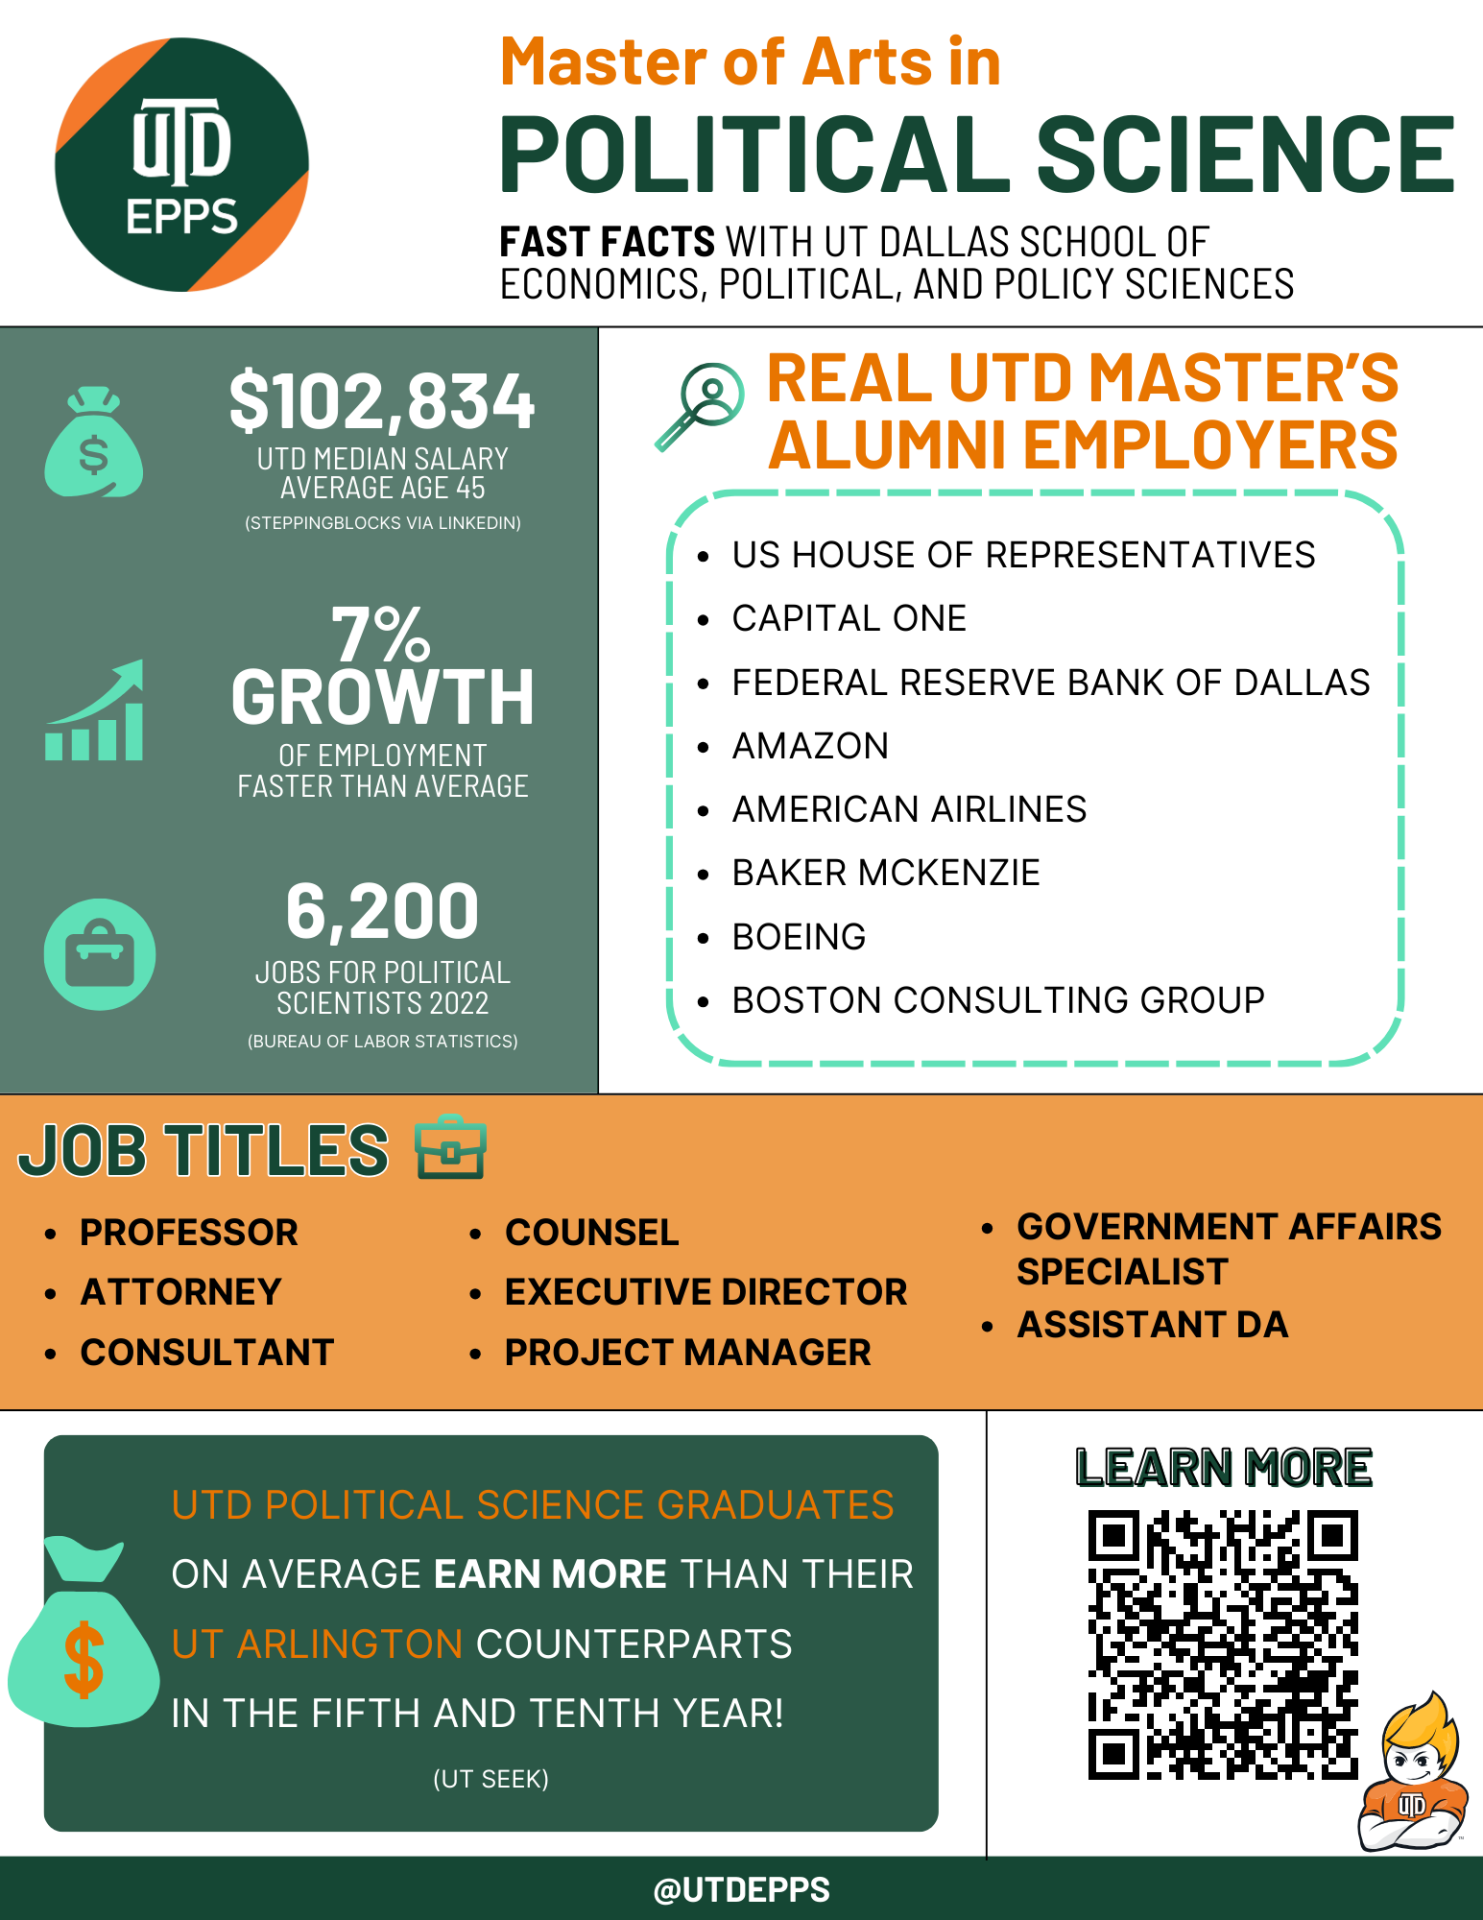 Master of Arts in
Political Science. Fast Facts with UT Dallas school of economics, political, and policy sciences.

2,834 is the UTD Median Salary
(Average age 45). Data is from Steppingblocks via LinkedIn. 7% Growth OF Employment Fast Than Average. 6,200 Jobs for Political Scientists 2022. Data is from Bureau of Labor Statistics.

REAL UTD MASTER’S ALUMNI EMPLOYERS include:
US House of Representatives
Capital One
Federal Reserve Bank of Dallas
Amazon
American Airlines
Baker McKenzie
Boeing
Boston Consulting Group

Job Titles include:
Professor
Attorney
Consultant
Counsel
Executive Director
Project Manager
Government Affairs Specialist
Assistant DA

UTD POLITICAL SCIENCE graduates on average earn more than their UT Arlington counterparts in the fifth and tenth year! Data is from UTSEEK.

LEARN MORE by scanning the QR code. 

@UTDEPPS
